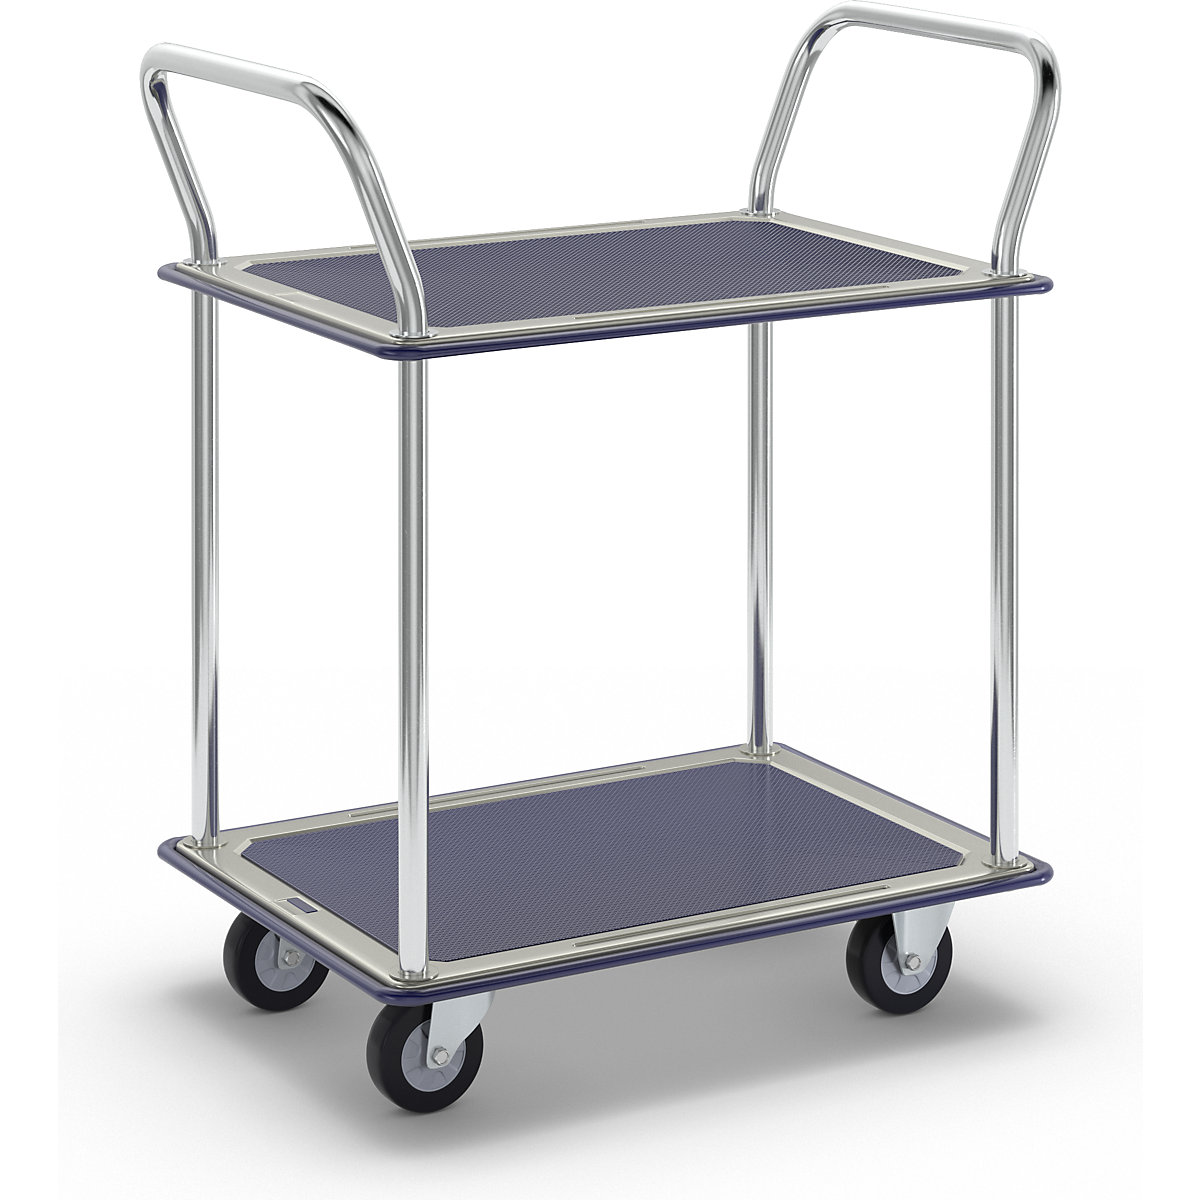 Table trolley chrome plated, 2 shelves with non-slip covering, 2 push handles, max. load 150 kg-1